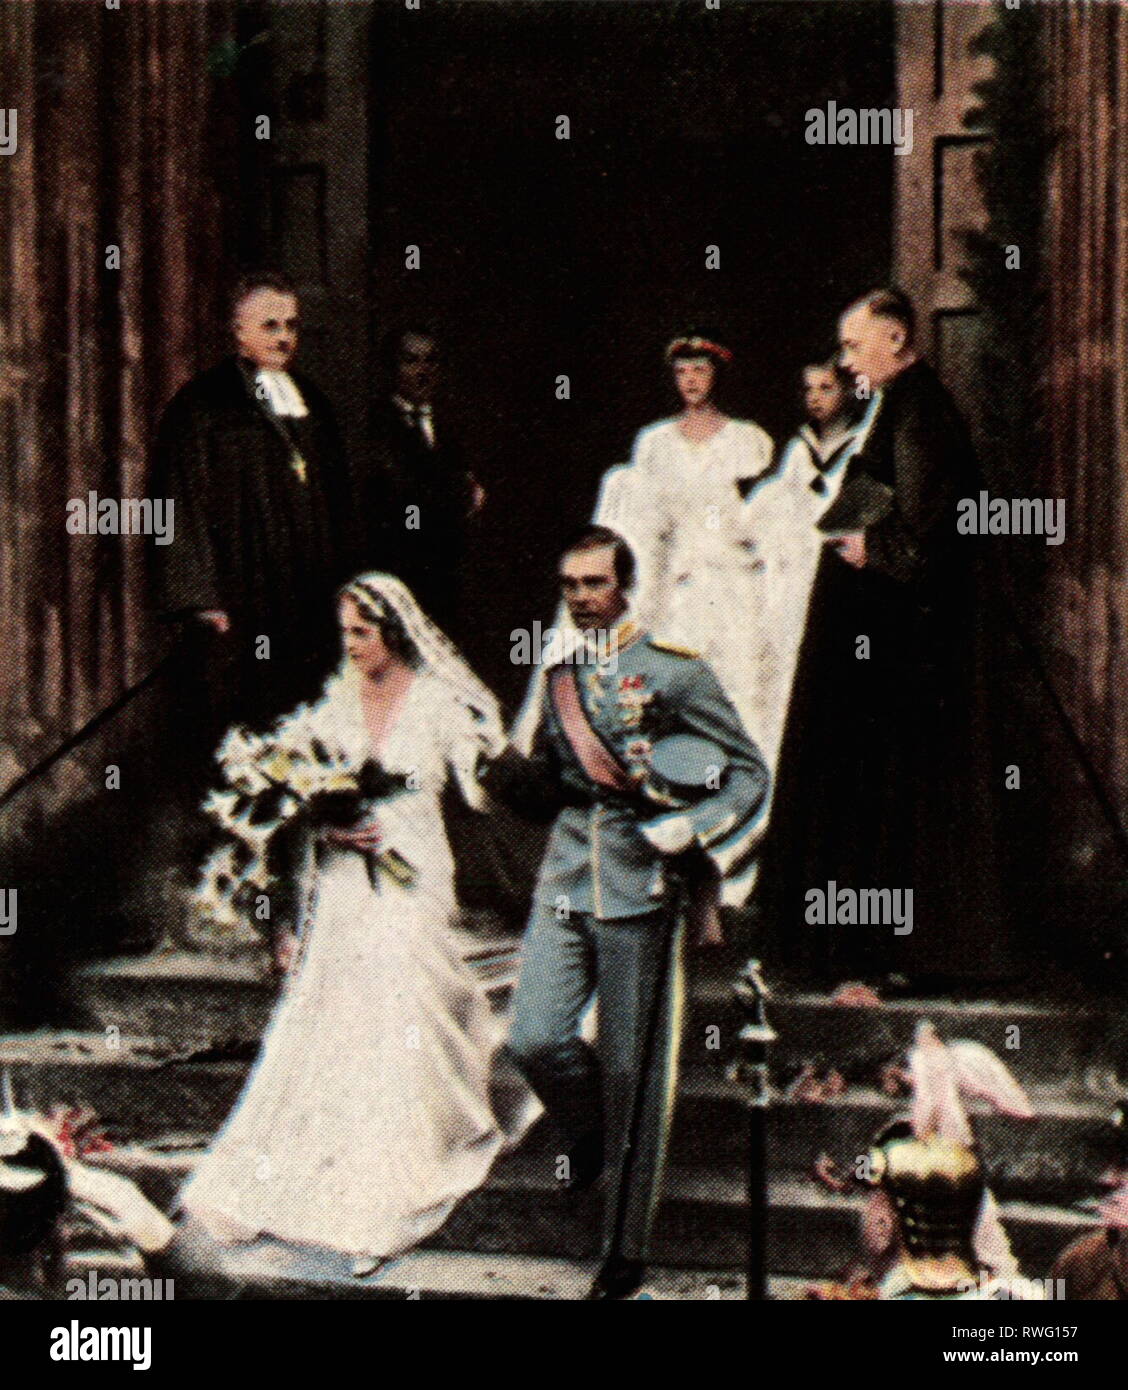 Gustaf Adolf, 22.4.1906 - 26.1.1947, hereditary prince of Sweden, full length, wedding with Sibylla from Saxe-Coburg-Gotha, the bridal couple is leaving Saint Moritz Church, Coburg, 20.10.1932, coloured photograph, cigarette card, series 'Die Nachkriegszeit', 1935, Additional-Rights-Clearance-Info-Not-Available Stock Photo